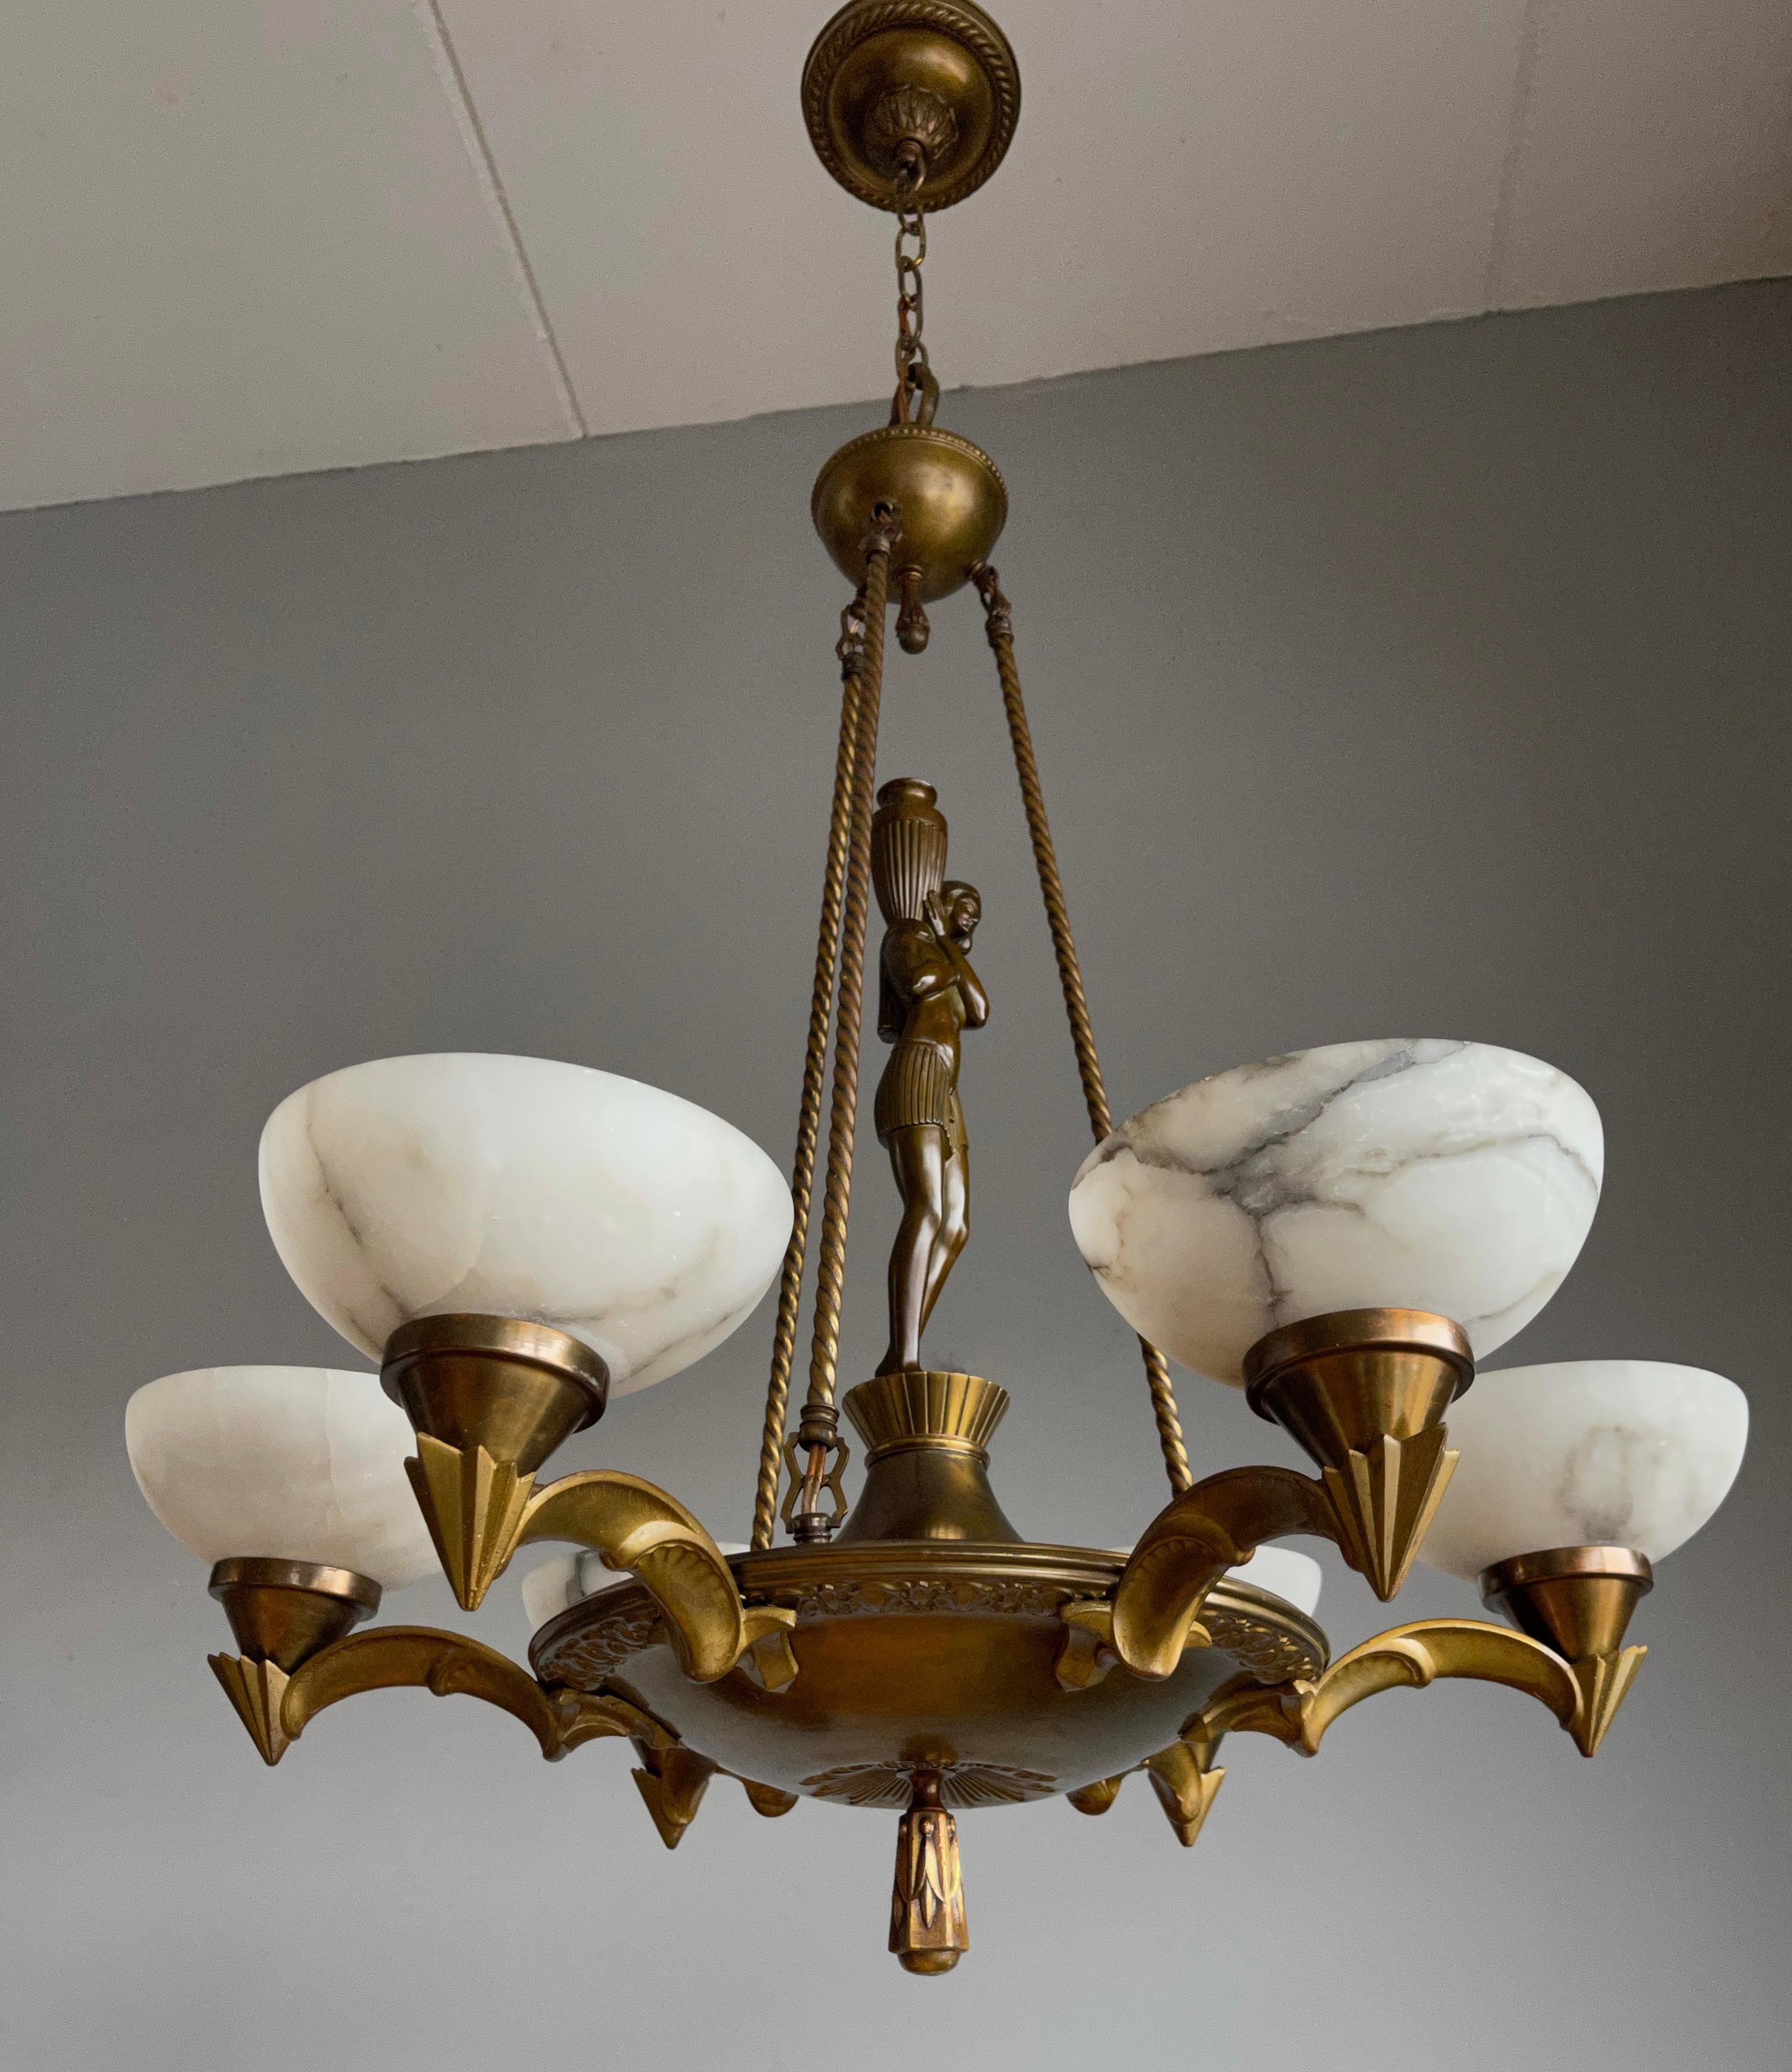 Pure and Stylish Art Deco Sculpture Chandelier w Stunning Alabaster Shades 1920s In Good Condition For Sale In Lisse, NL